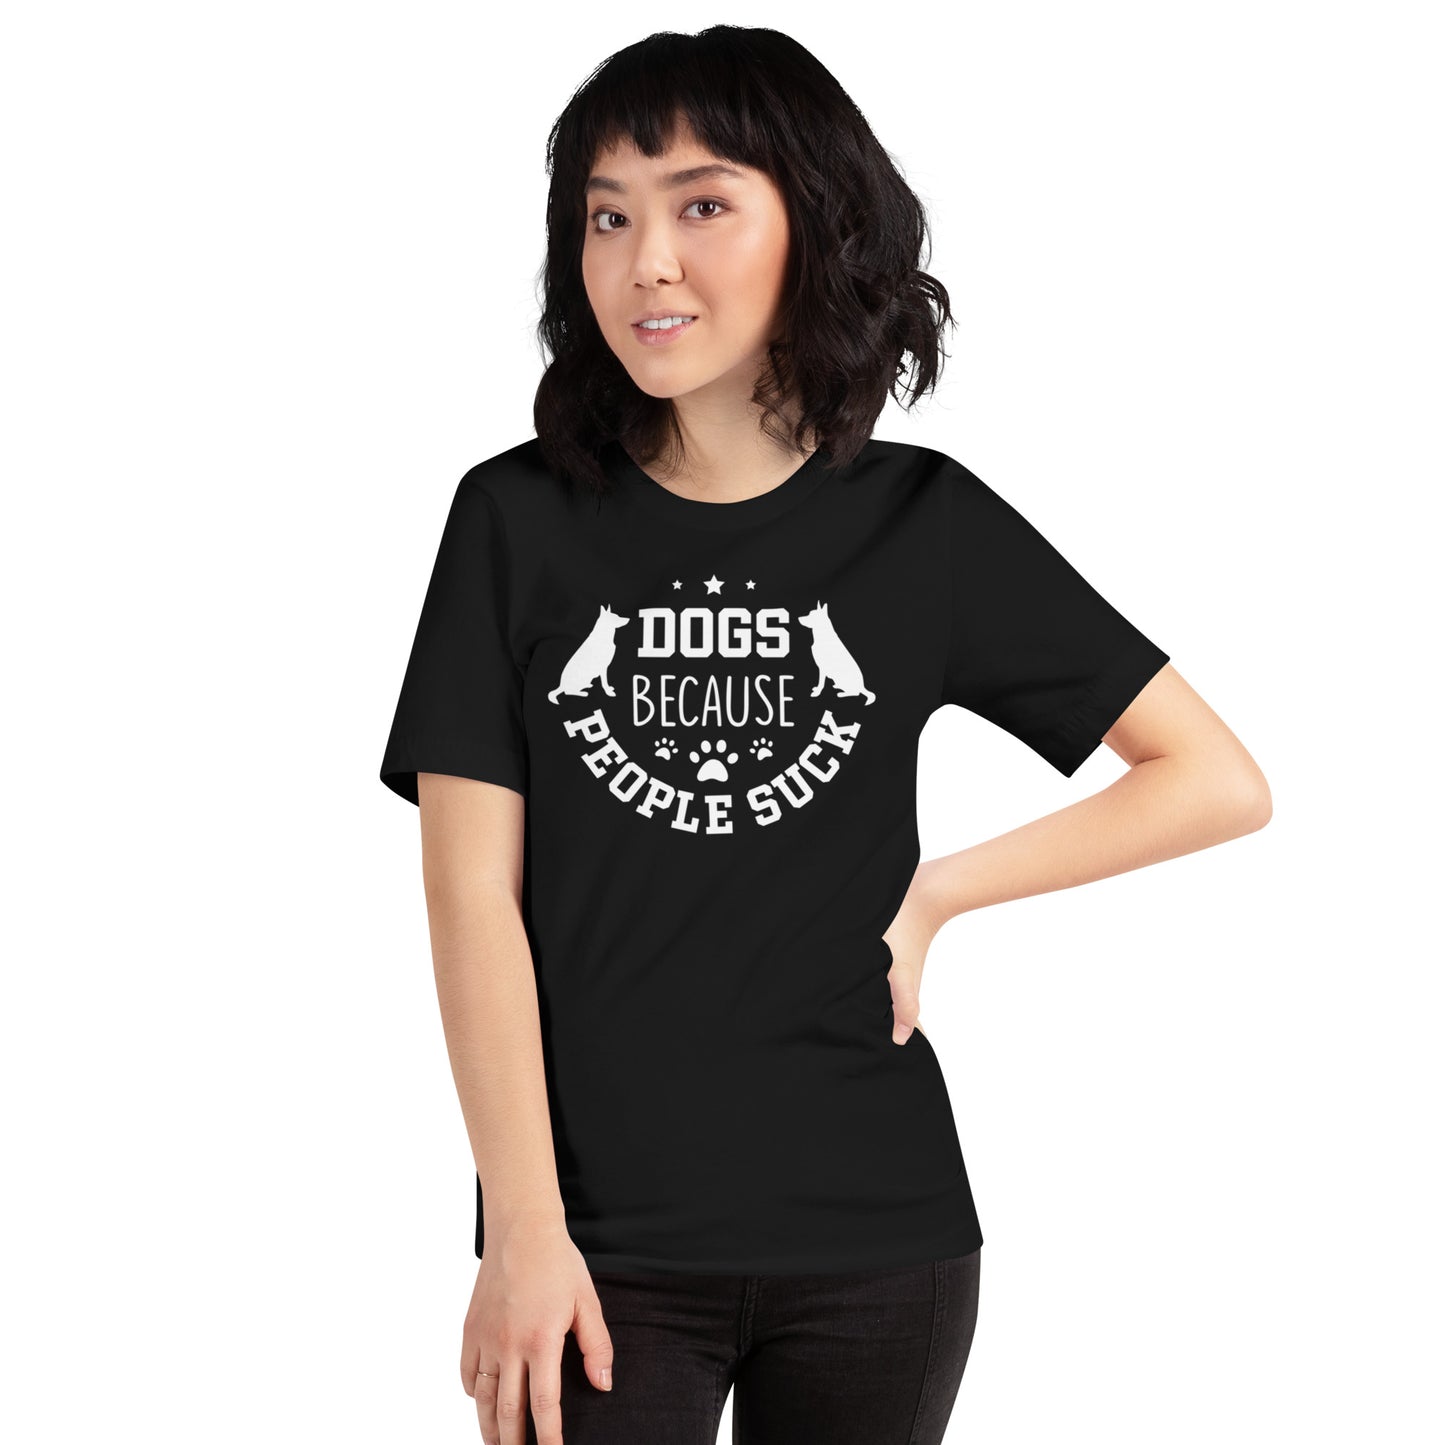 Dogs Because People Suck Unisex t-shirt